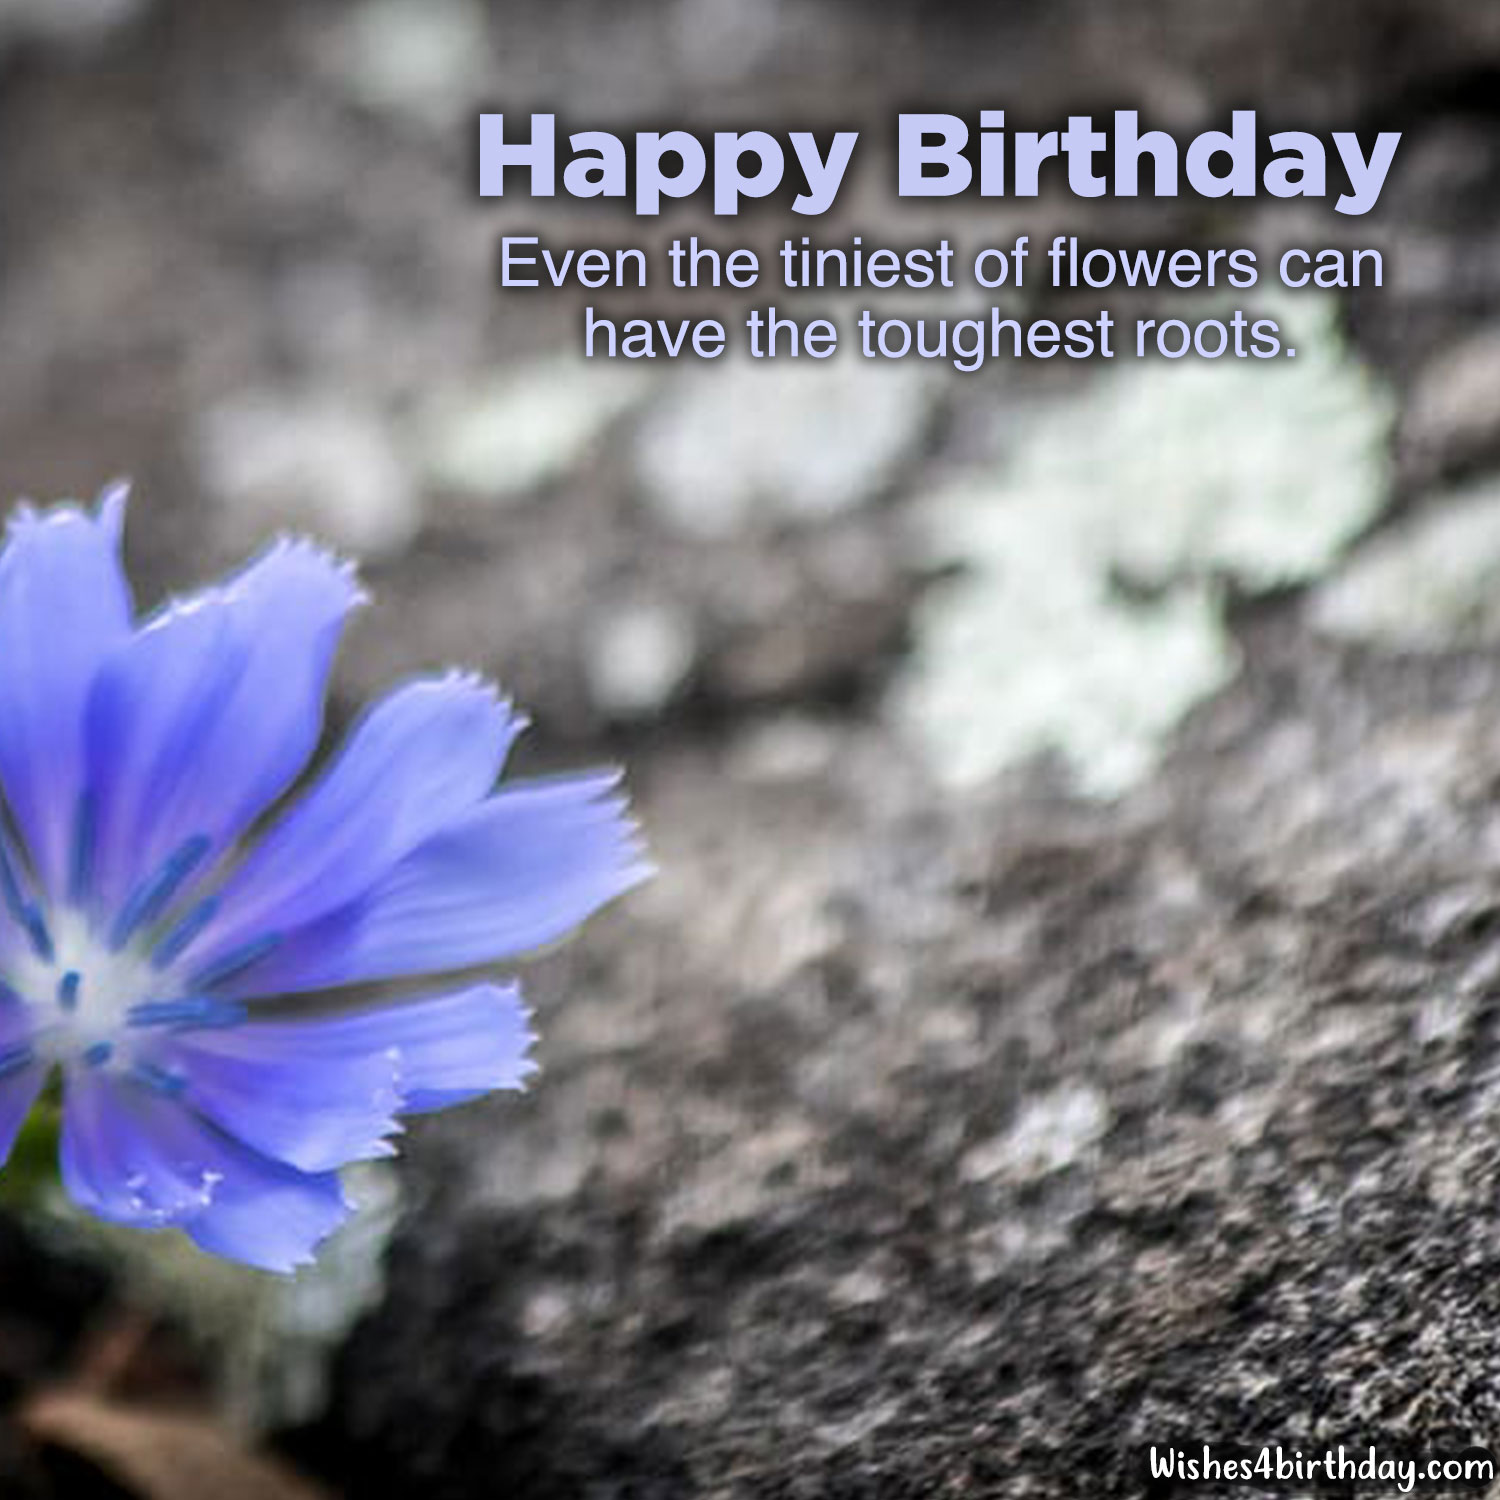 Most delighted and Birthday flower gifts for her - Happy Birthday ...